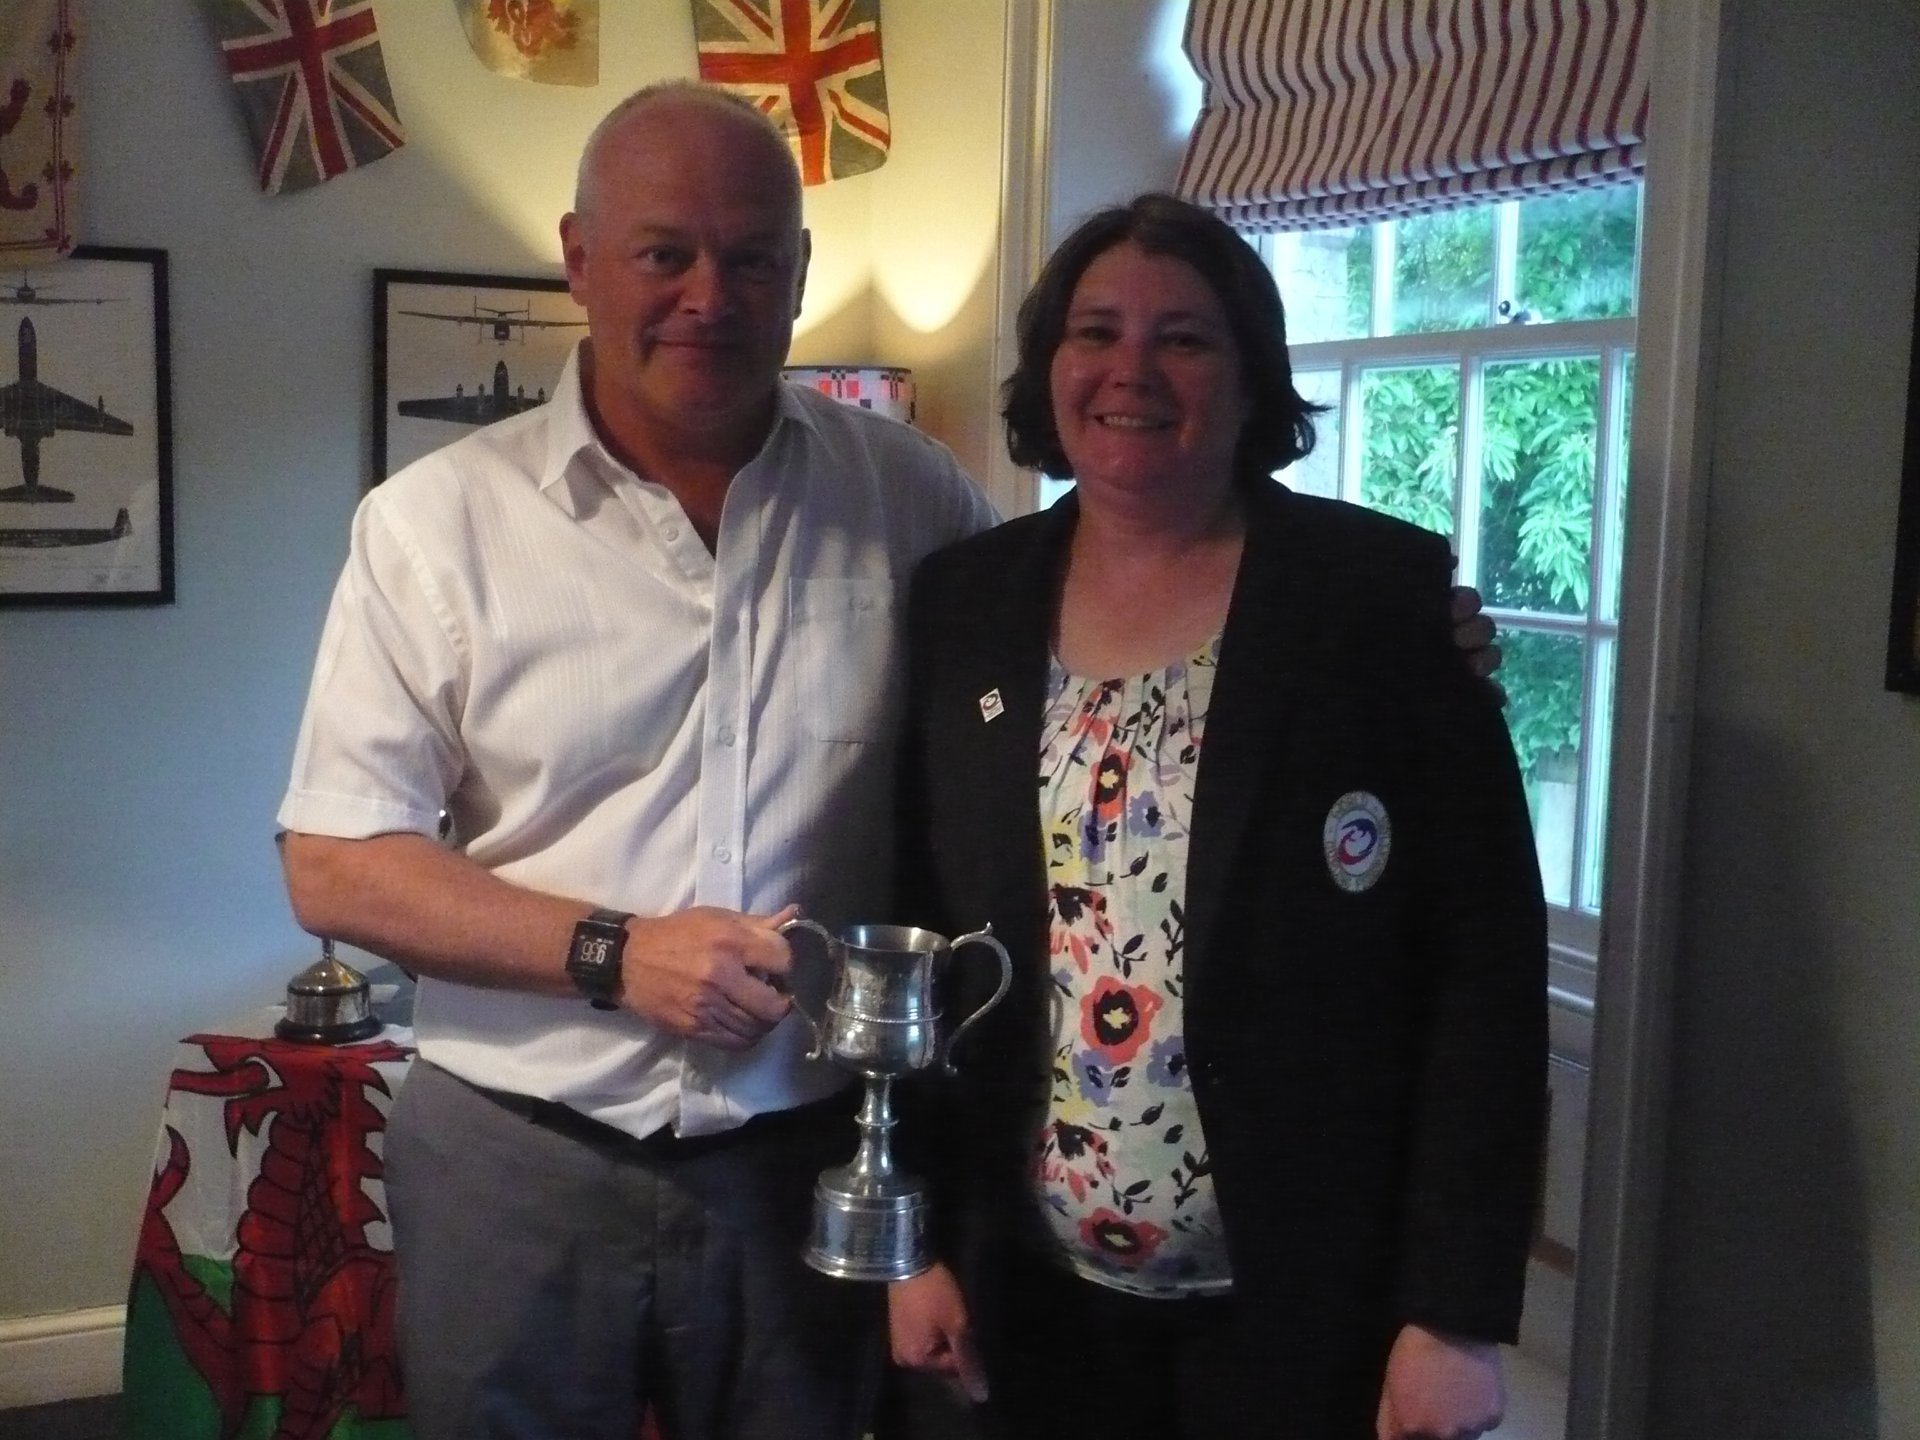 Photograph of Adrian Meikle, wearing a white shirt, handing a silver trophy to Lisa Peters, wearing a black blazer